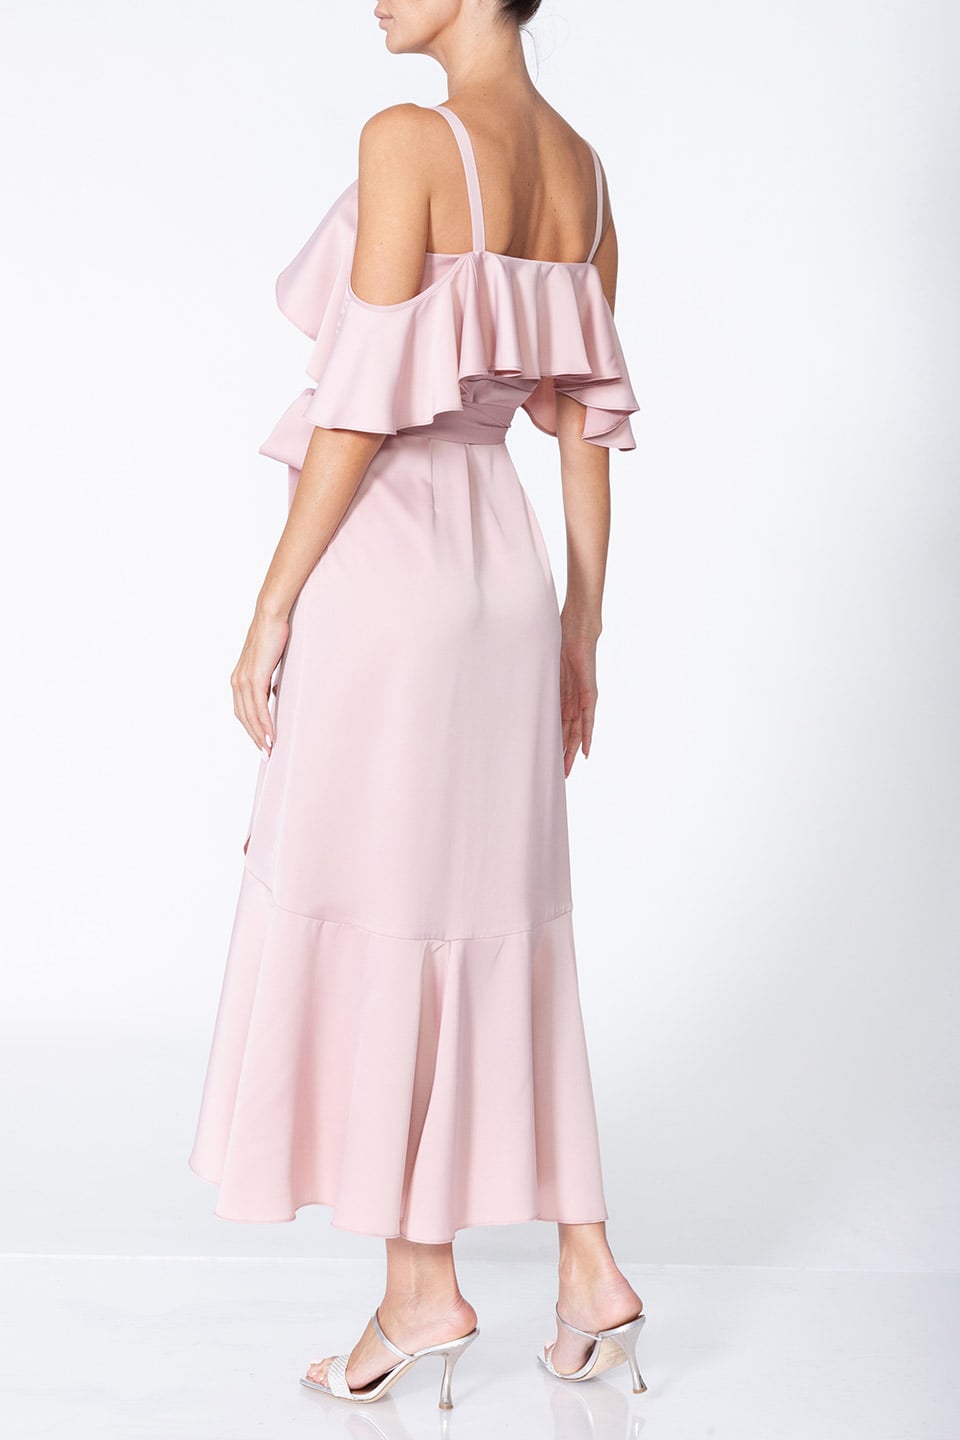 Thumbnail for Product gallery 6, Stylist Anze's pink midi dress with asymmetrical wrap silhouette, view from behind